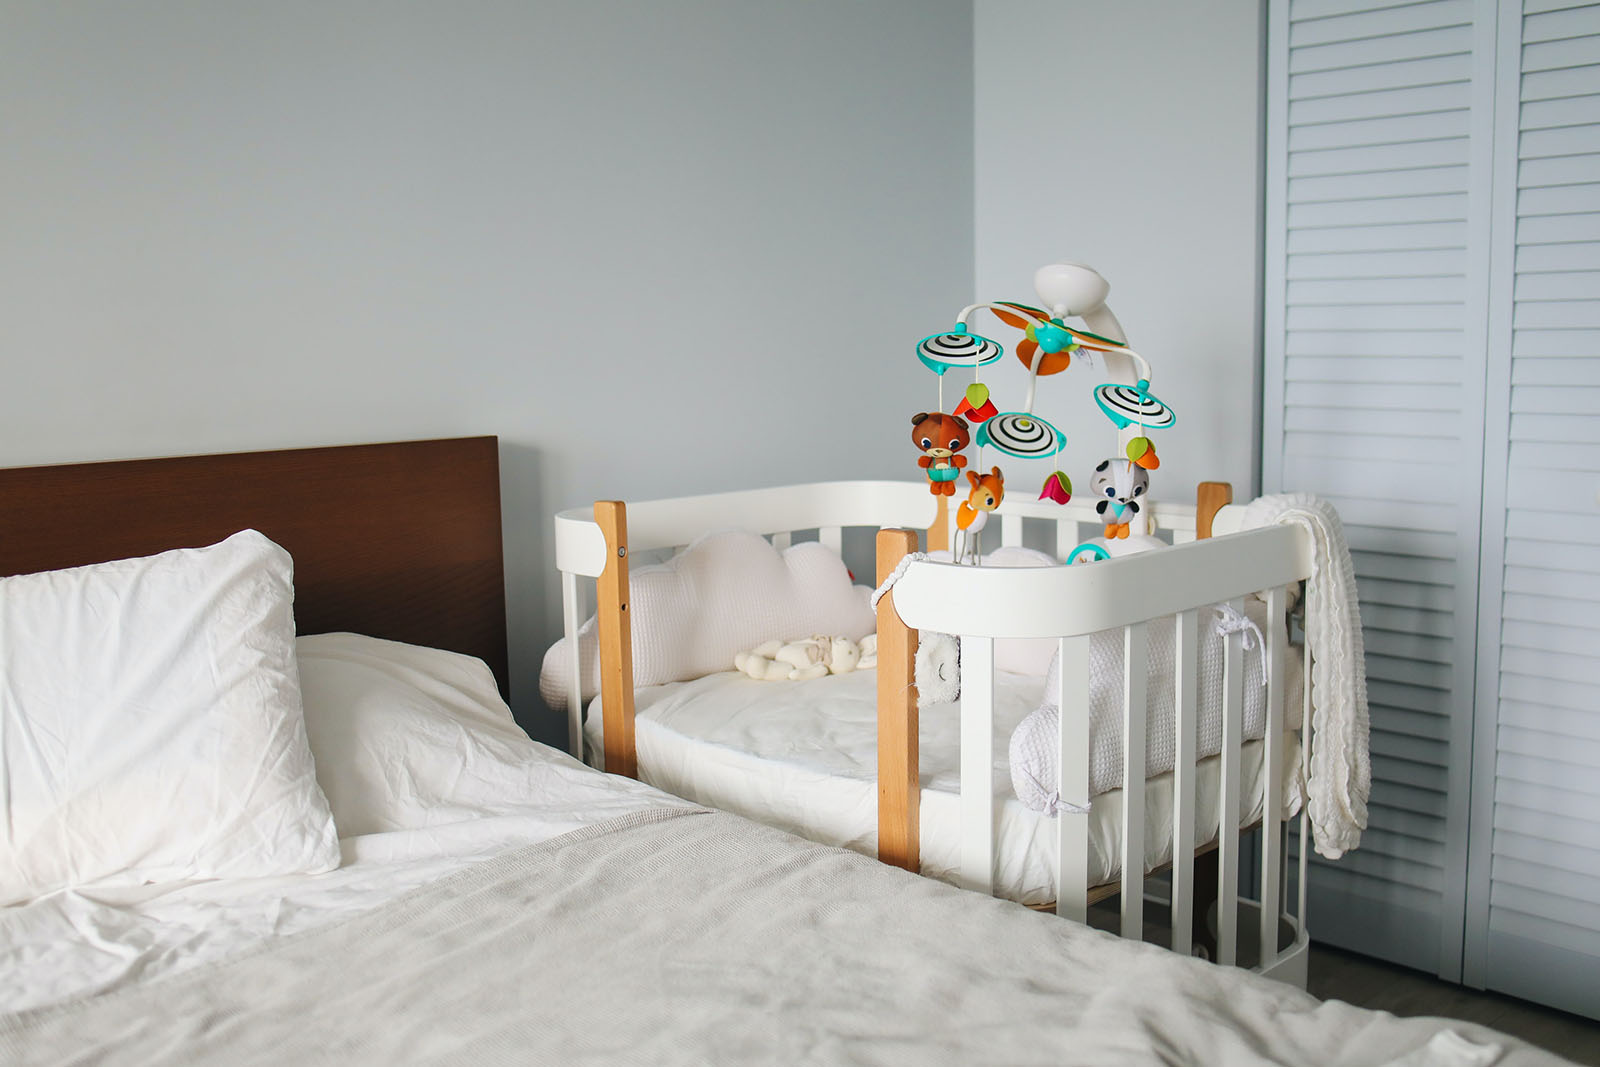 Baby Safe Paint for Nursery Walls (And When It's Safe) - My